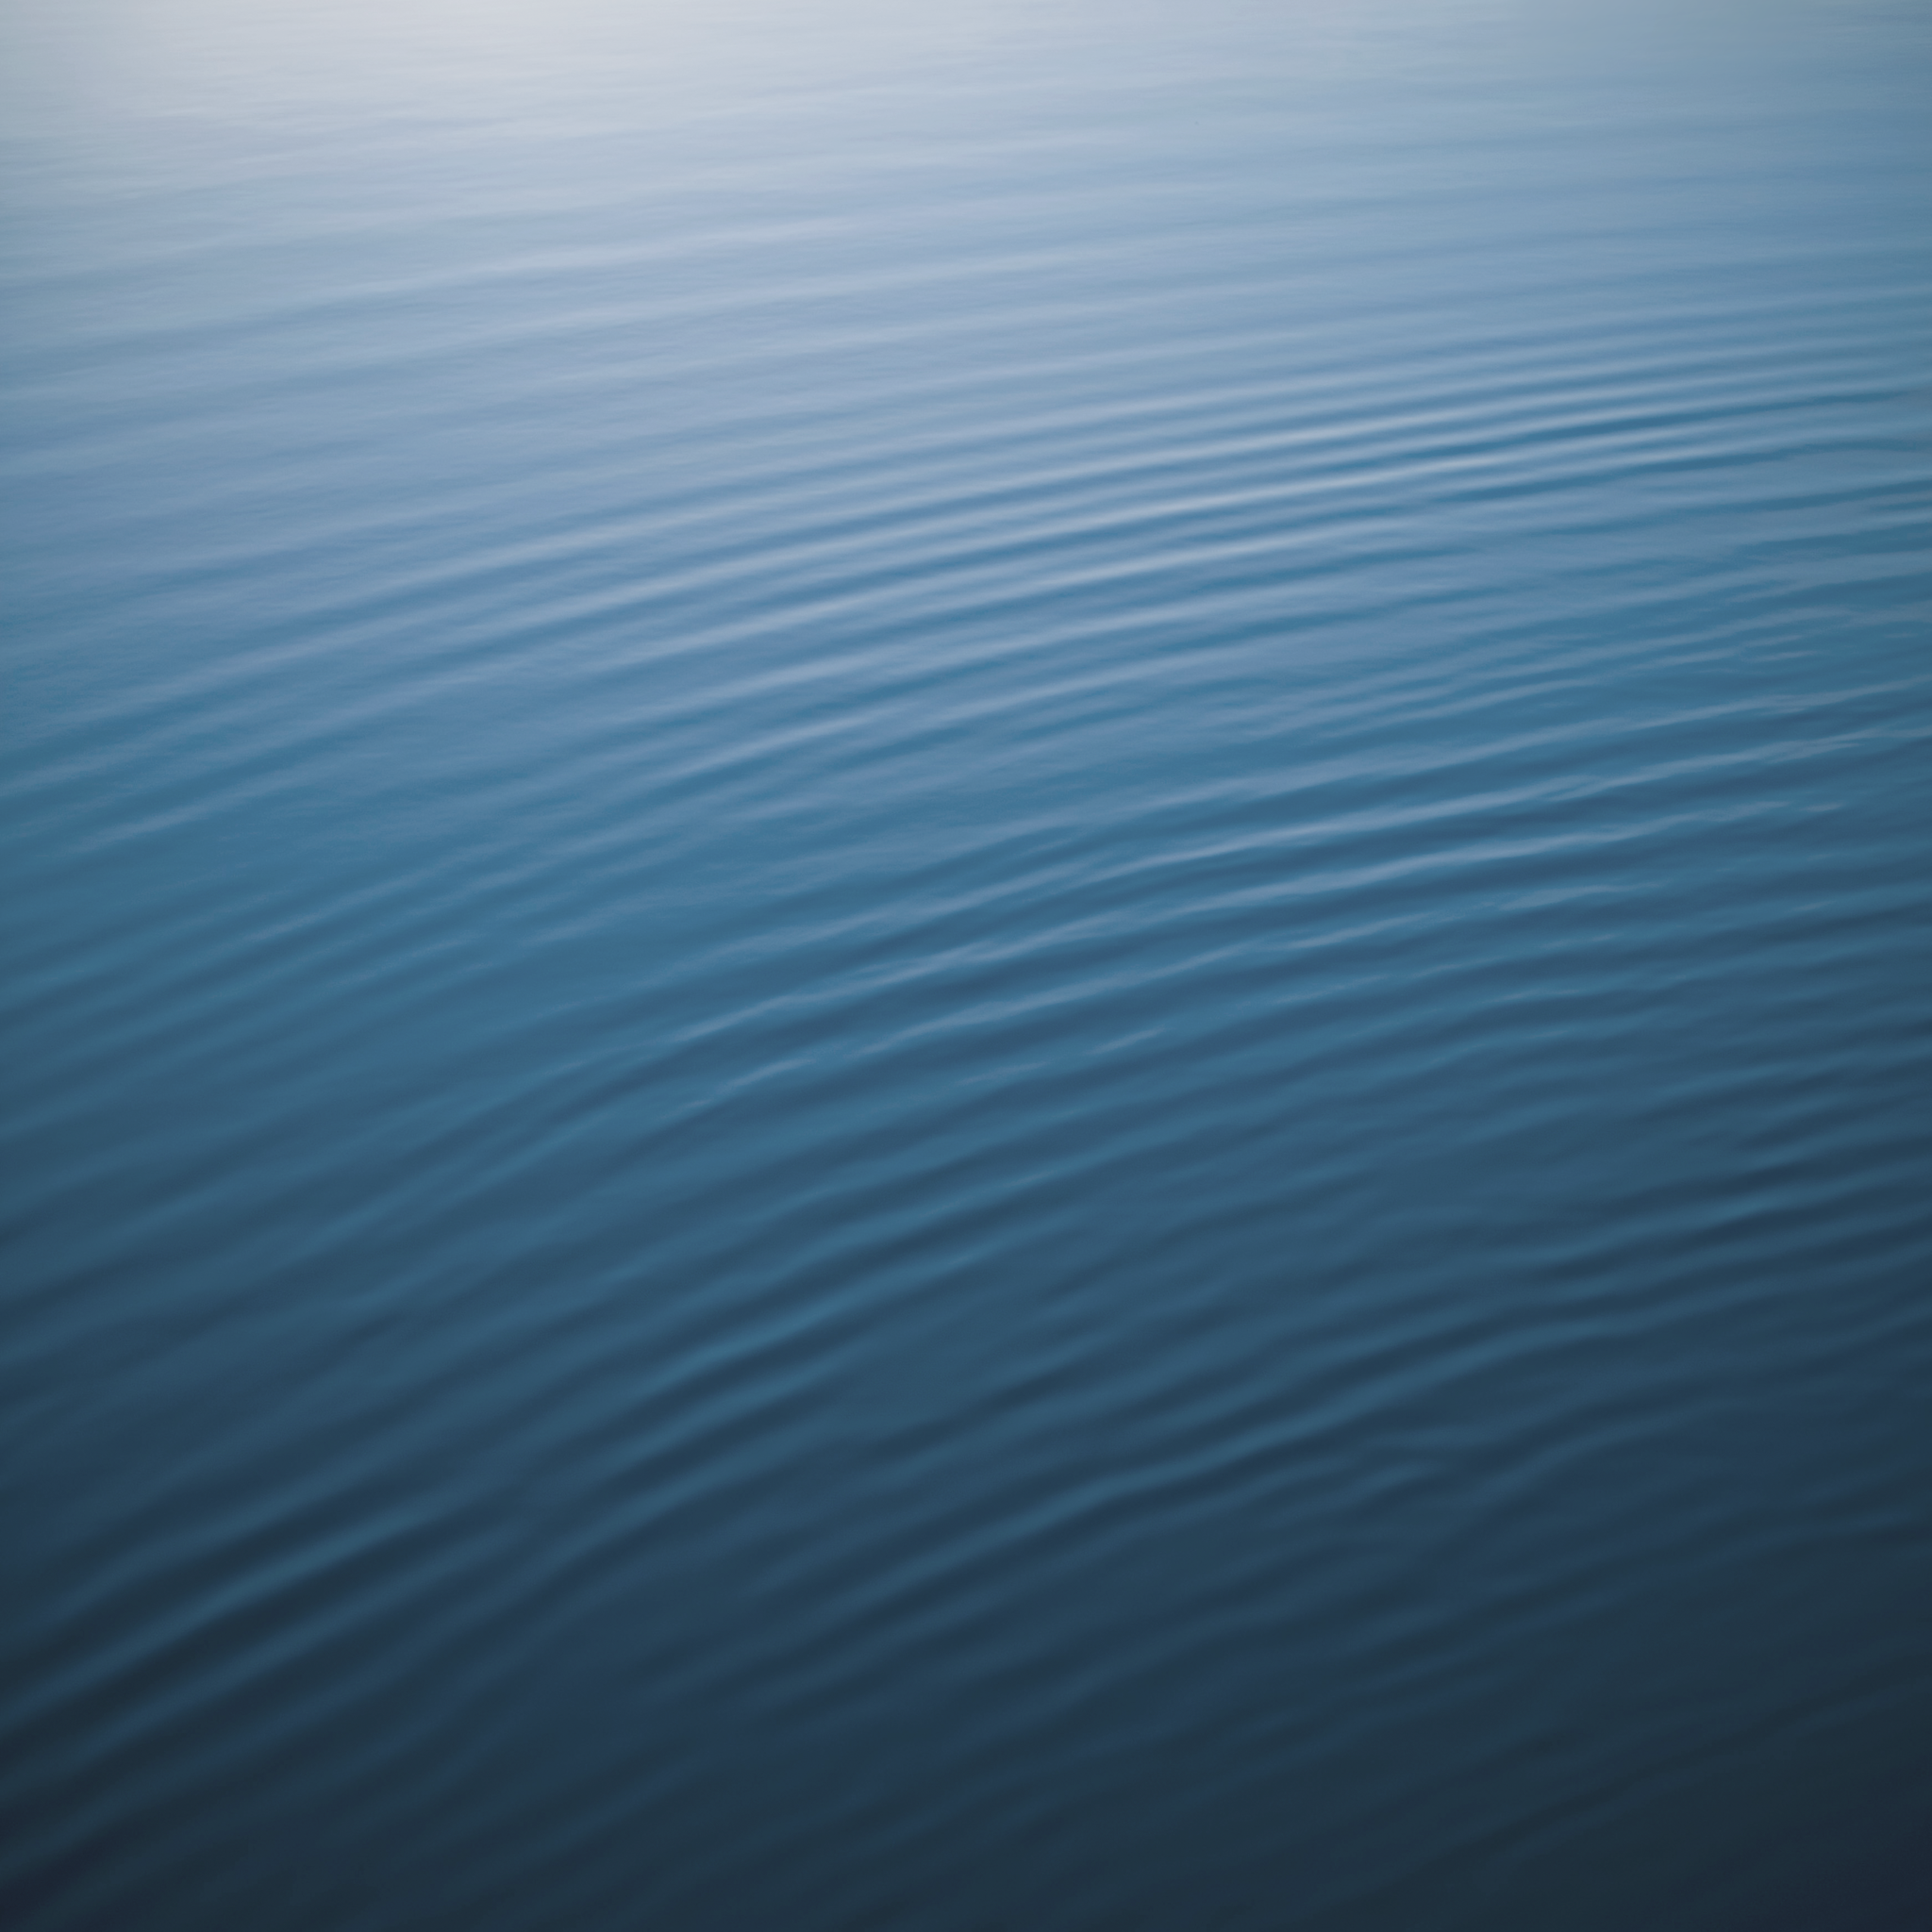 Rippled Water Wallpaper For iPad Click To The Image In Full